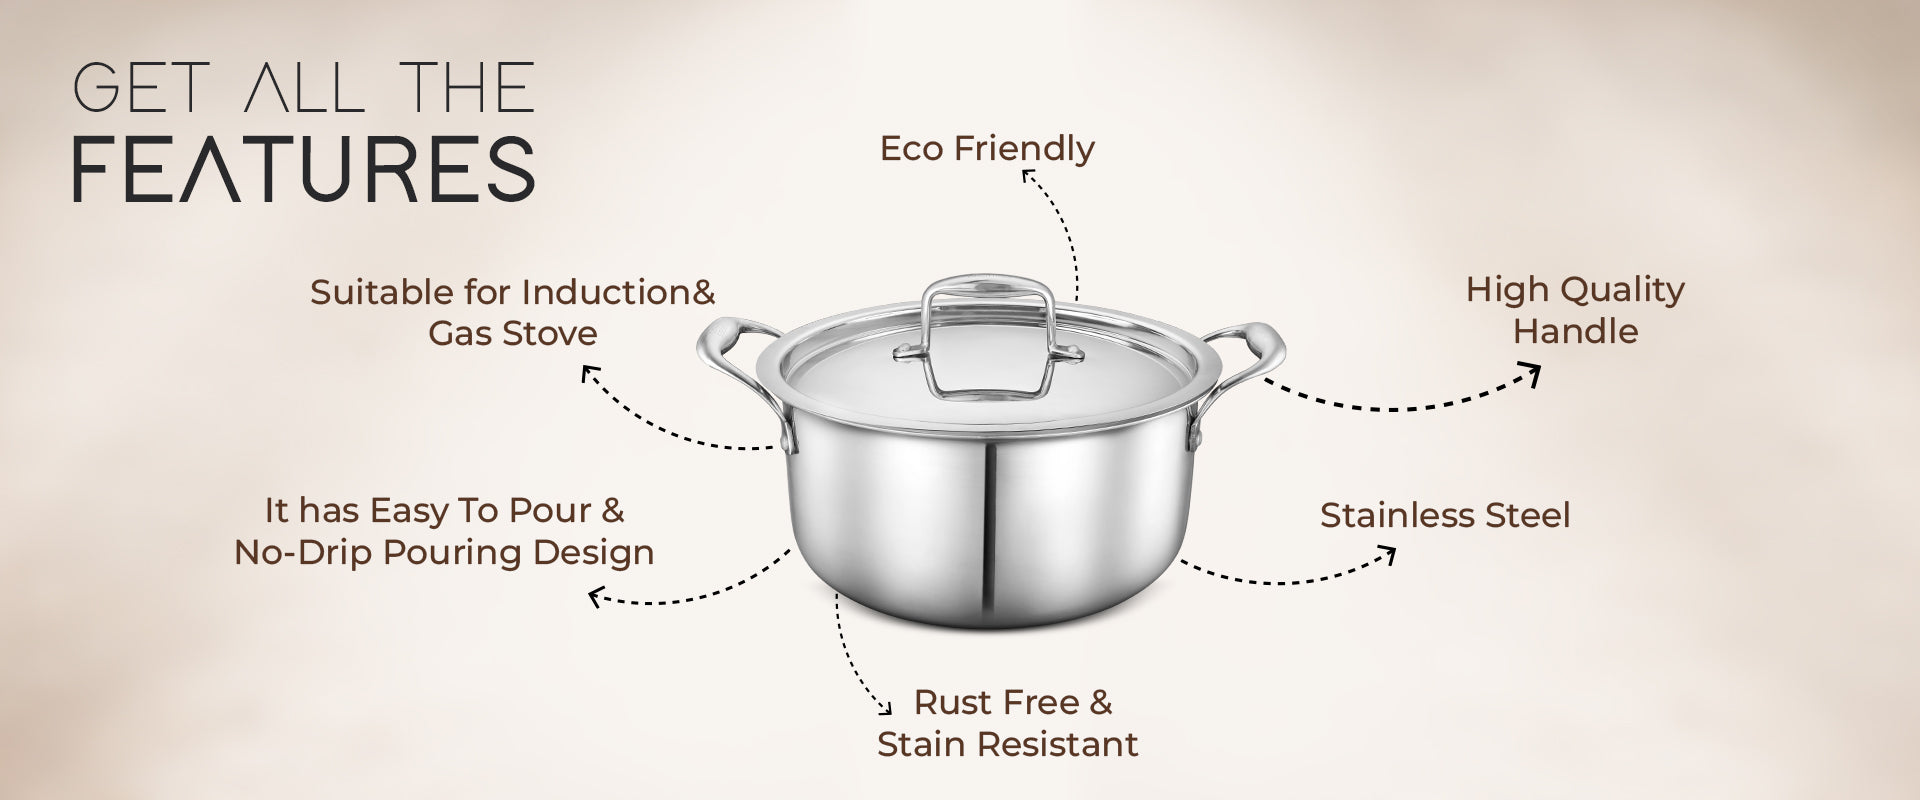 Suitable For Induction & Gas Stove